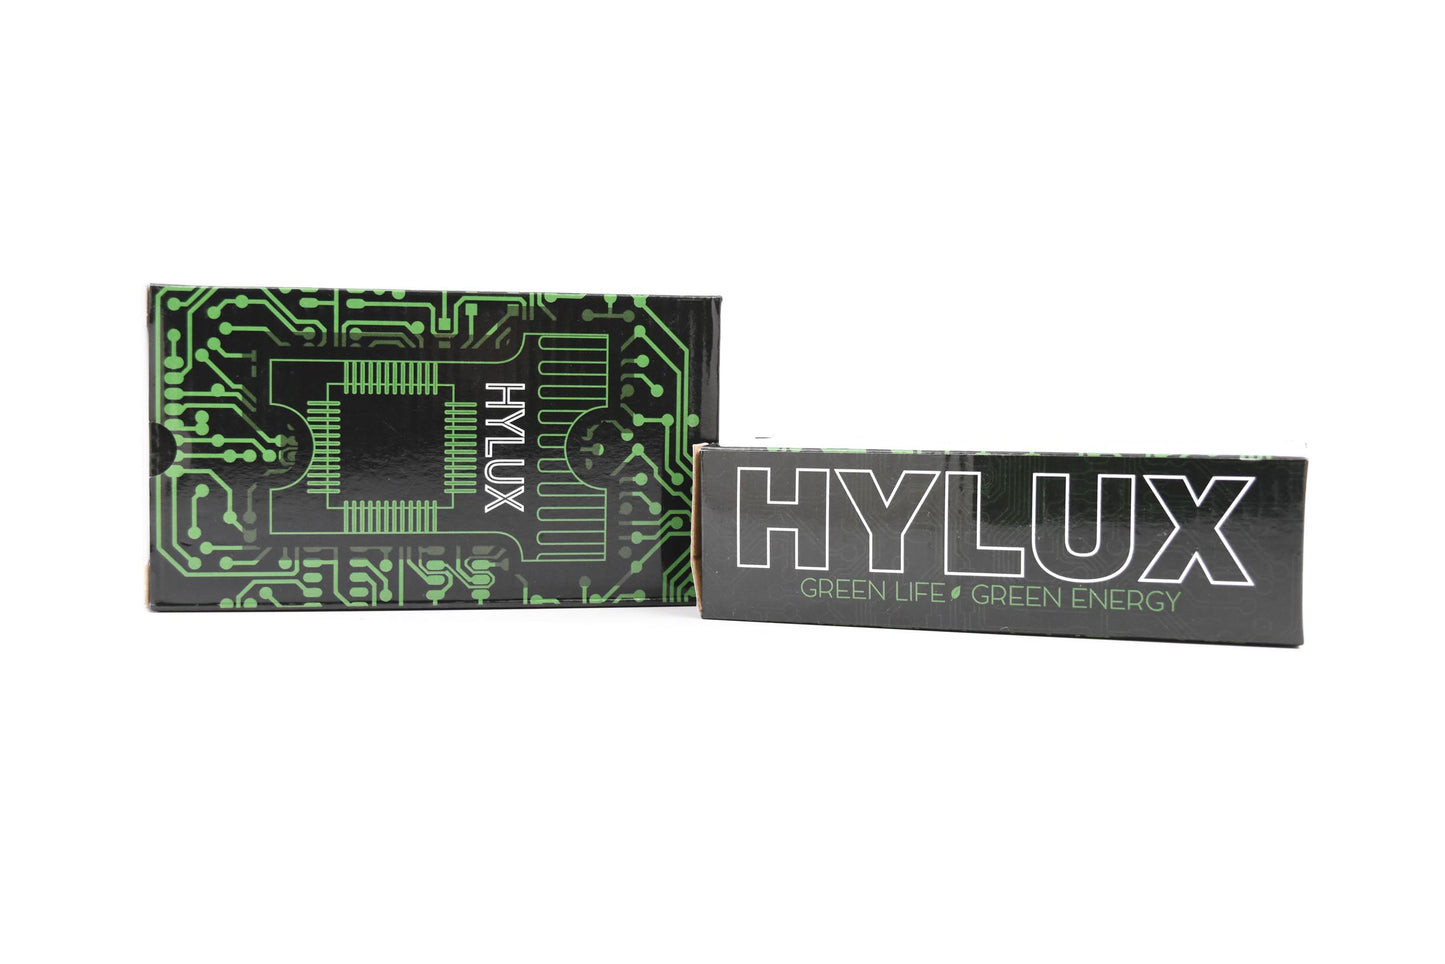 35W / AMP: Hylux 2A88 Canbus Ballast